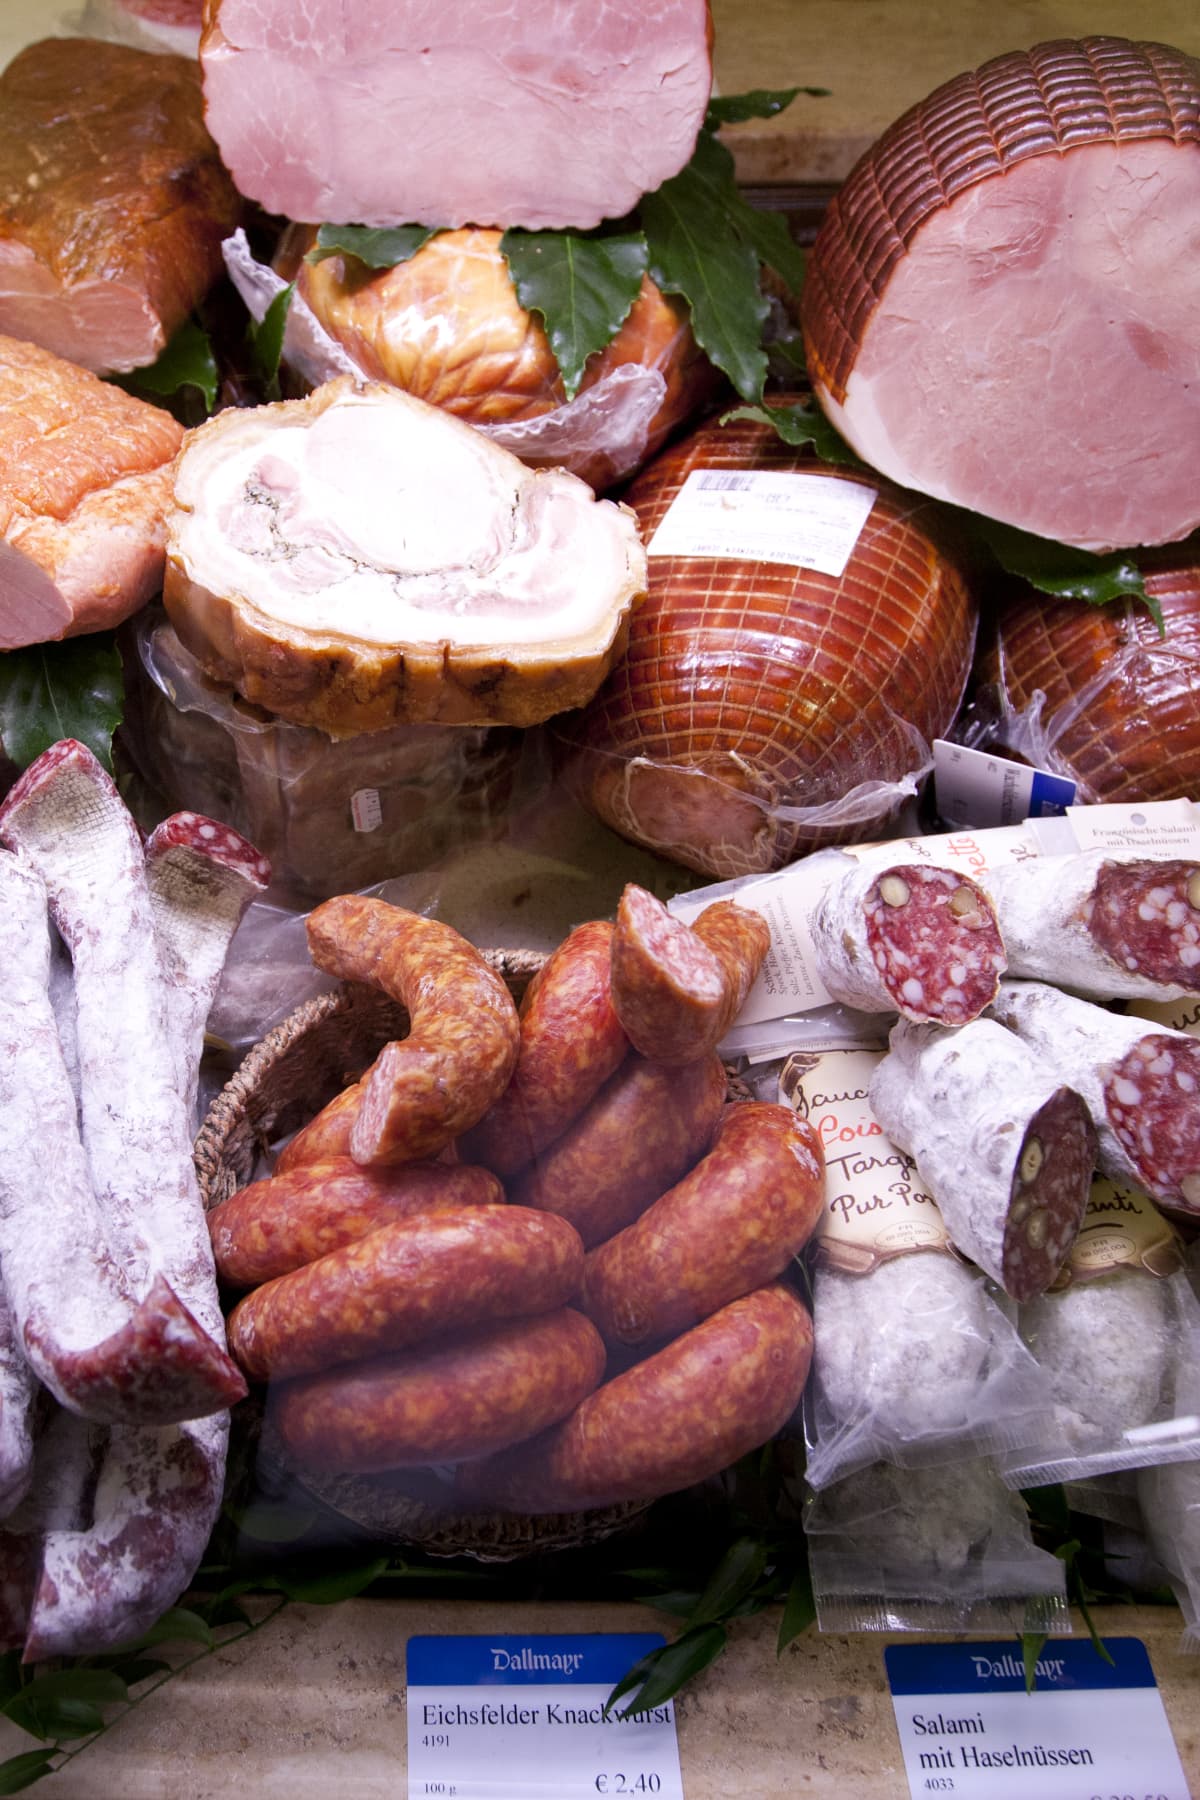 An assortment of cured meats at a market